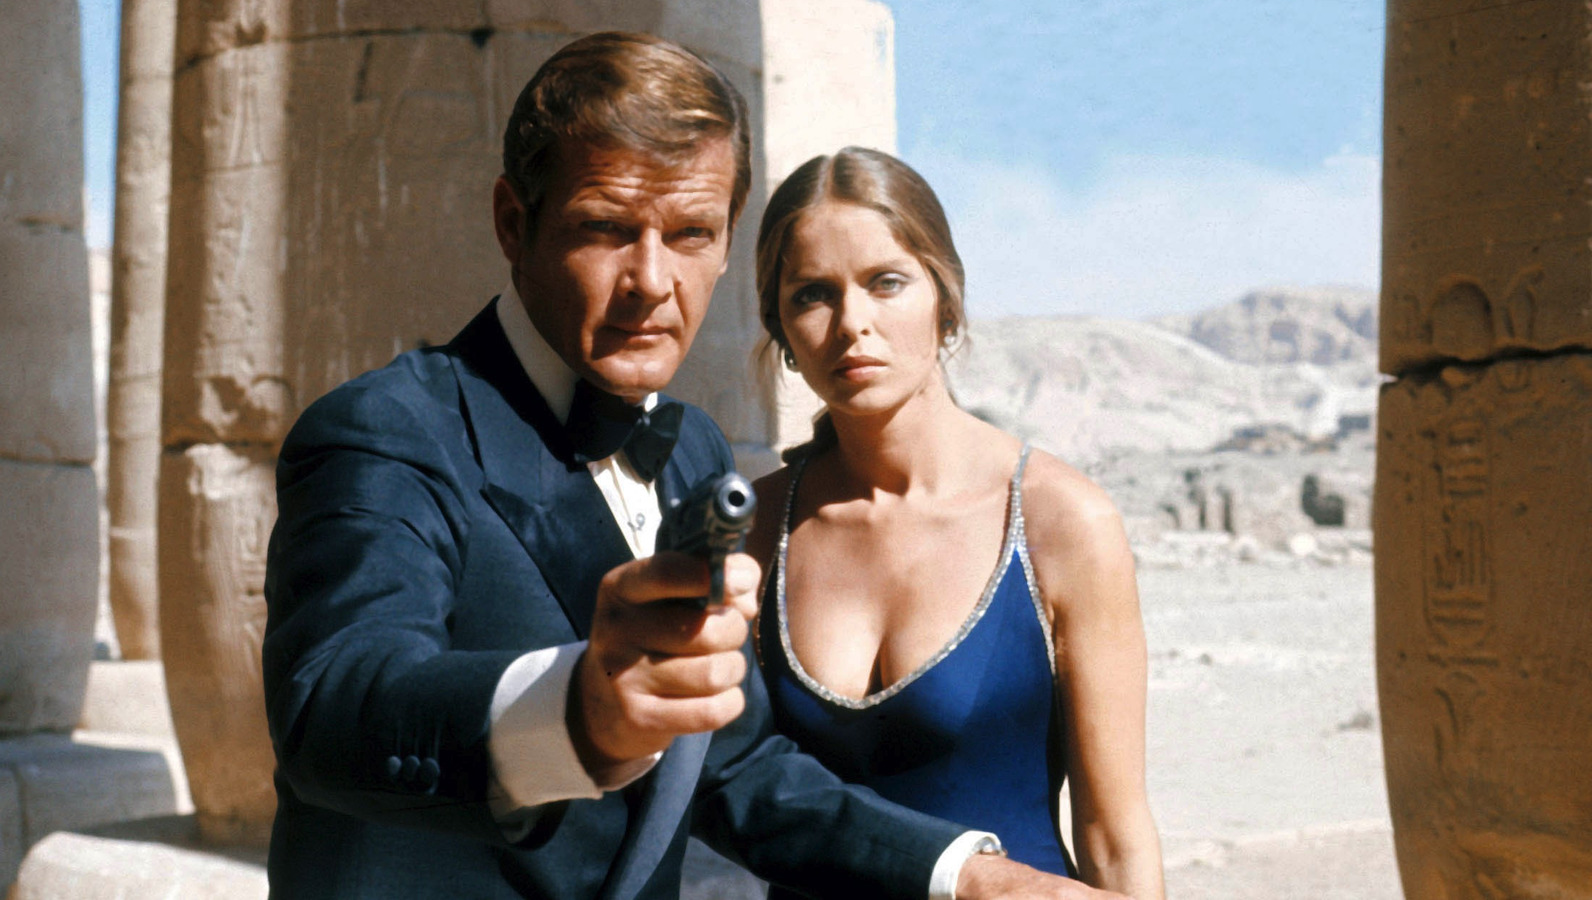 A man in a tux holding a gun with a blonde in a low cut dress behind him